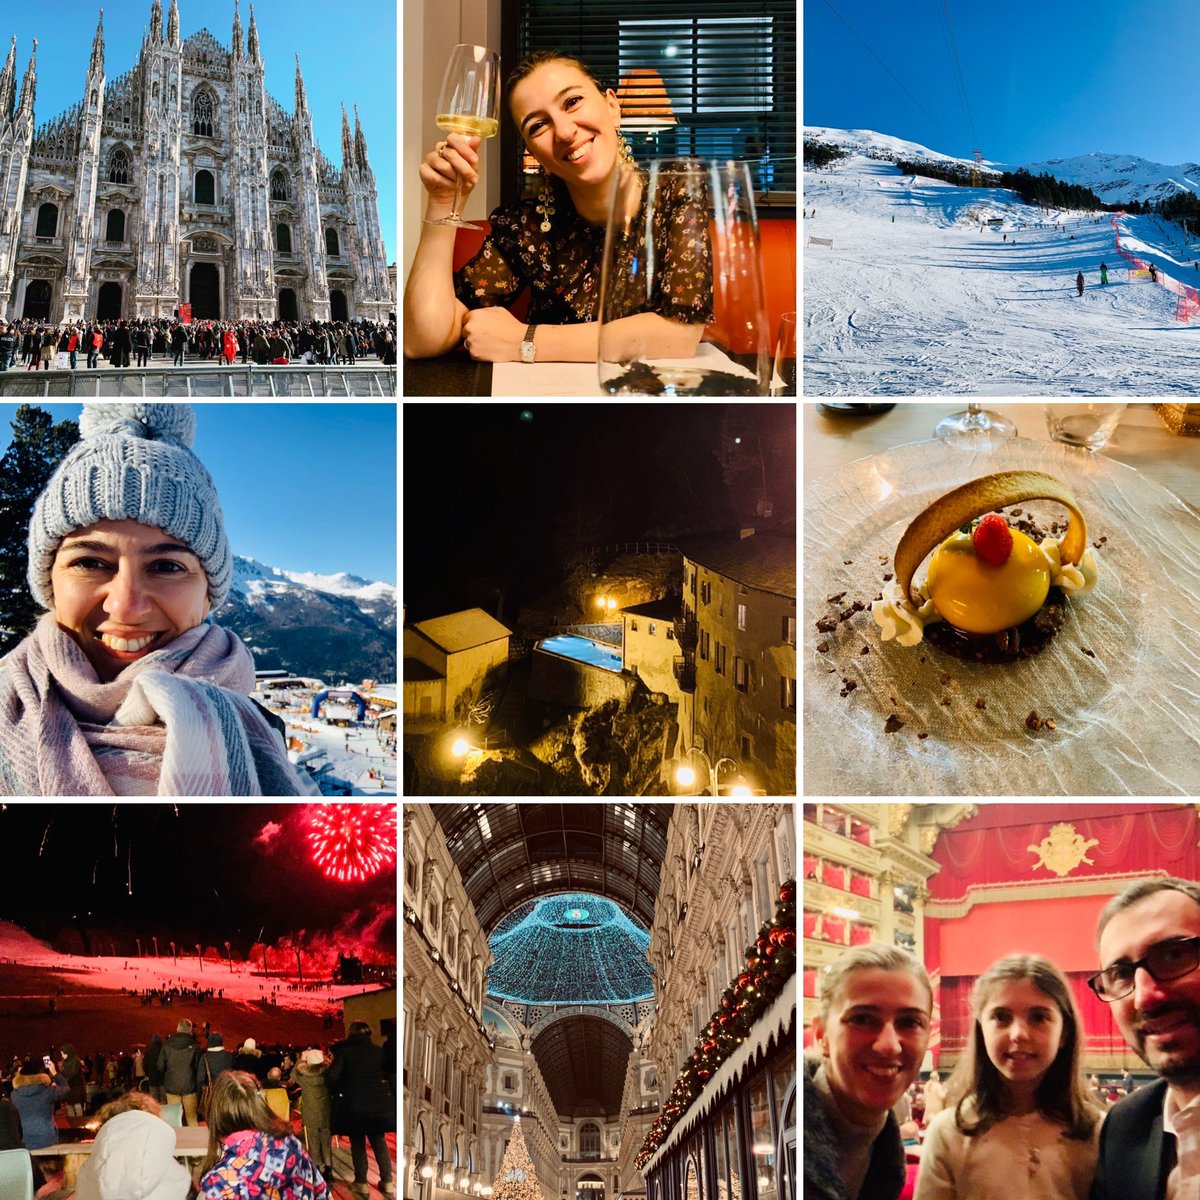 Beautiful 14 days - Christmas holidays in my hometown #Milan and #Bormio #Italy #Europe #familytime #lovefood #Alps #lovewellness